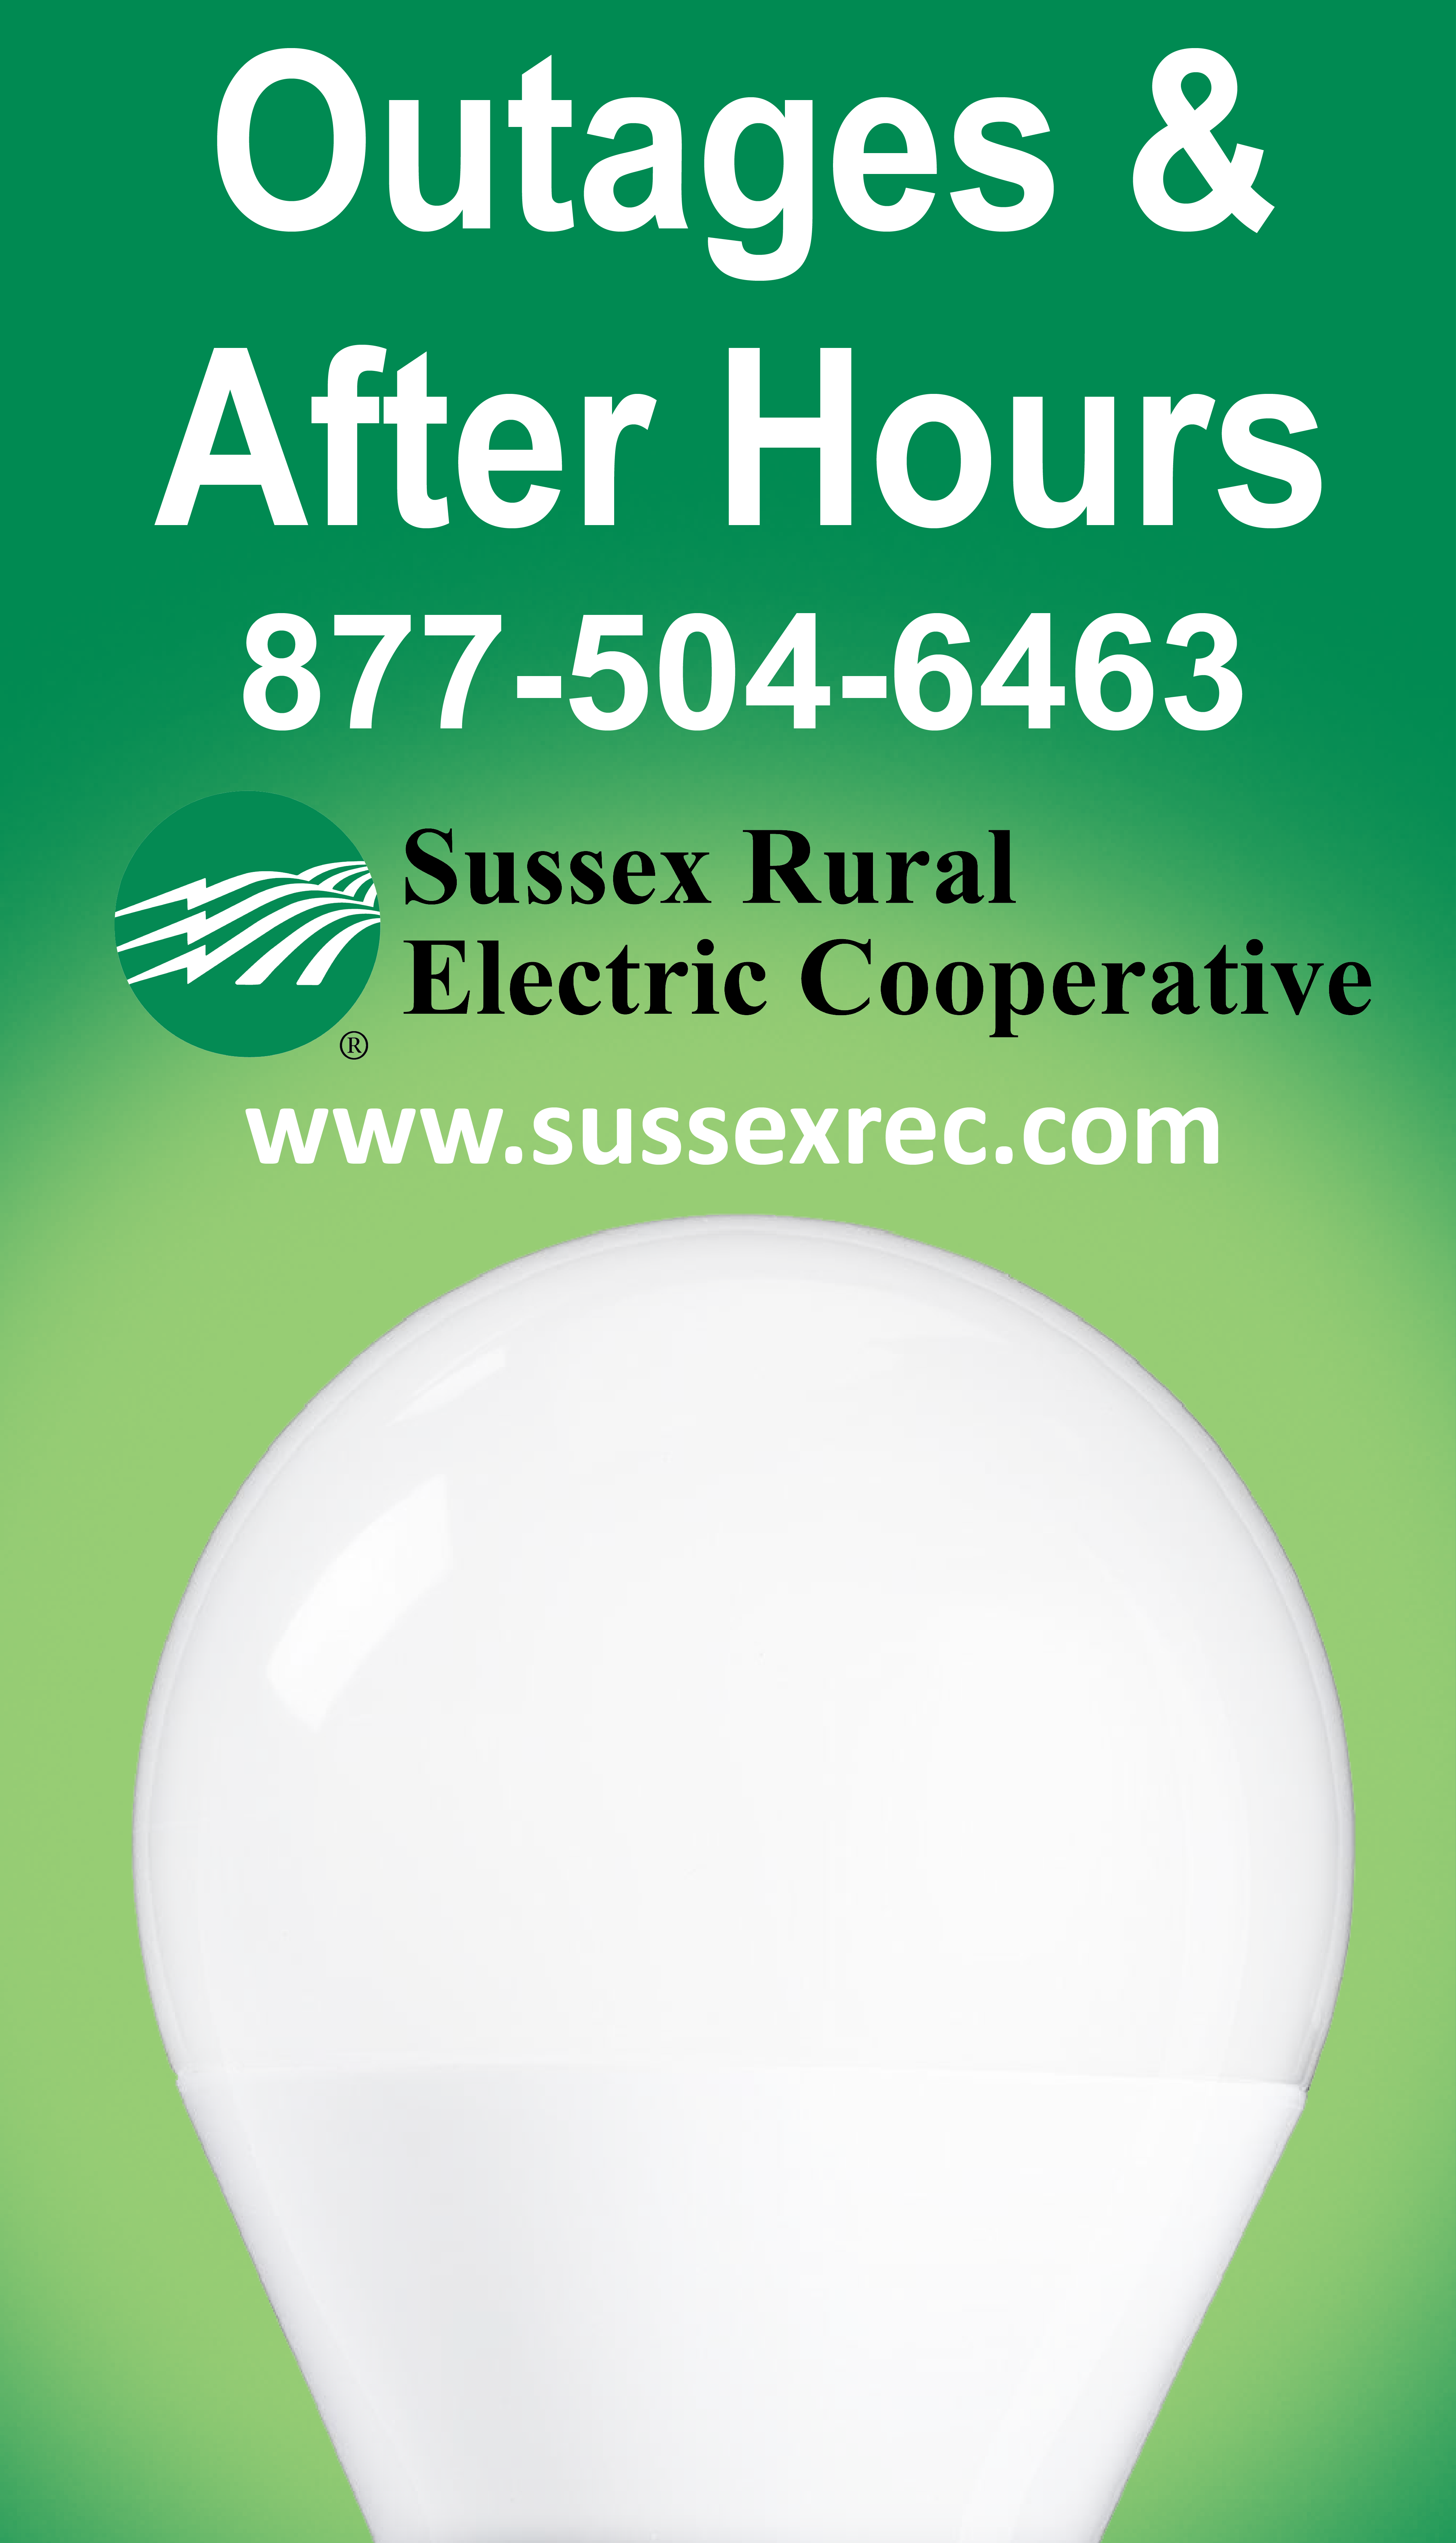 Outages and After Hours phone number - 877-504-6463